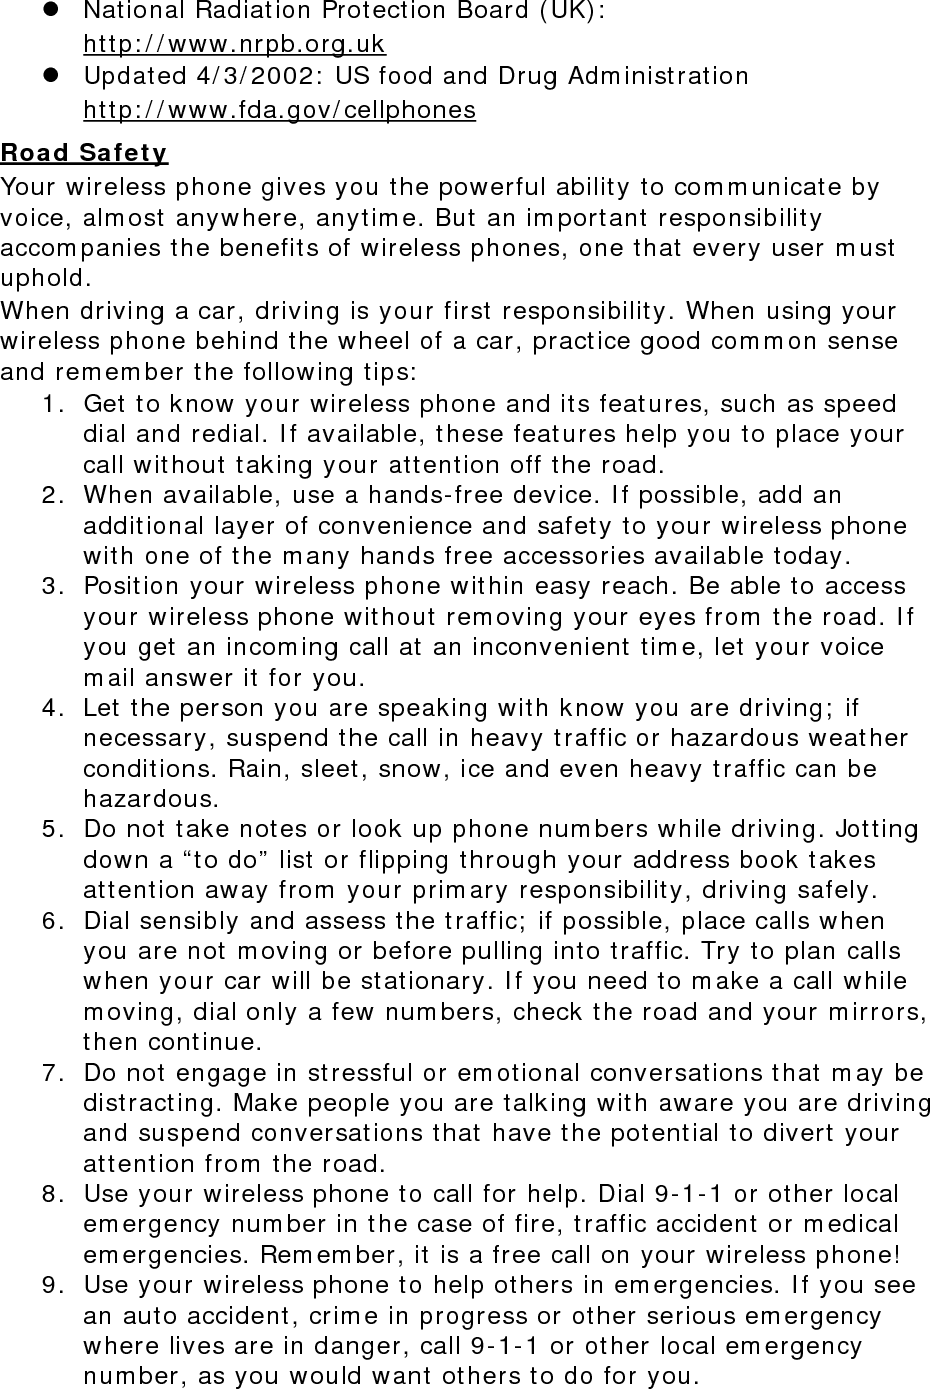  National Radiation Protection Board (UK):  http://www.nrpb.org.uk  Updated 4/3/2002: US food and Drug Administration  http://www.fda.gov/cellphones Road Safety Your wireless phone gives you the powerful ability to communicate by voice, almost anywhere, anytime. But an important responsibility accompanies the benefits of wireless phones, one that every user must uphold. When driving a car, driving is your first responsibility. When using your wireless phone behind the wheel of a car, practice good common sense and remember the following tips: 1. Get to know your wireless phone and its features, such as speed dial and redial. If available, these features help you to place your call without taking your attention off the road. 2. When available, use a hands-free device. If possible, add an additional layer of convenience and safety to your wireless phone with one of the many hands free accessories available today. 3. Position your wireless phone within easy reach. Be able to access your wireless phone without removing your eyes from the road. If you get an incoming call at an inconvenient time, let your voice mail answer it for you. 4. Let the person you are speaking with know you are driving; if necessary, suspend the call in heavy traffic or hazardous weather conditions. Rain, sleet, snow, ice and even heavy traffic can be hazardous. 5. Do not take notes or look up phone numbers while driving. Jotting down a “to do” list or flipping through your address book takes attention away from your primary responsibility, driving safely. 6. Dial sensibly and assess the traffic; if possible, place calls when you are not moving or before pulling into traffic. Try to plan calls when your car will be stationary. If you need to make a call while moving, dial only a few numbers, check the road and your mirrors, then continue. 7. Do not engage in stressful or emotional conversations that may be distracting. Make people you are talking with aware you are driving and suspend conversations that have the potential to divert your attention from the road. 8. Use your wireless phone to call for help. Dial 9-1-1 or other local emergency number in the case of fire, traffic accident or medical emergencies. Remember, it is a free call on your wireless phone! 9. Use your wireless phone to help others in emergencies. If you see an auto accident, crime in progress or other serious emergency where lives are in danger, call 9-1-1 or other local emergency number, as you would want others to do for you. 